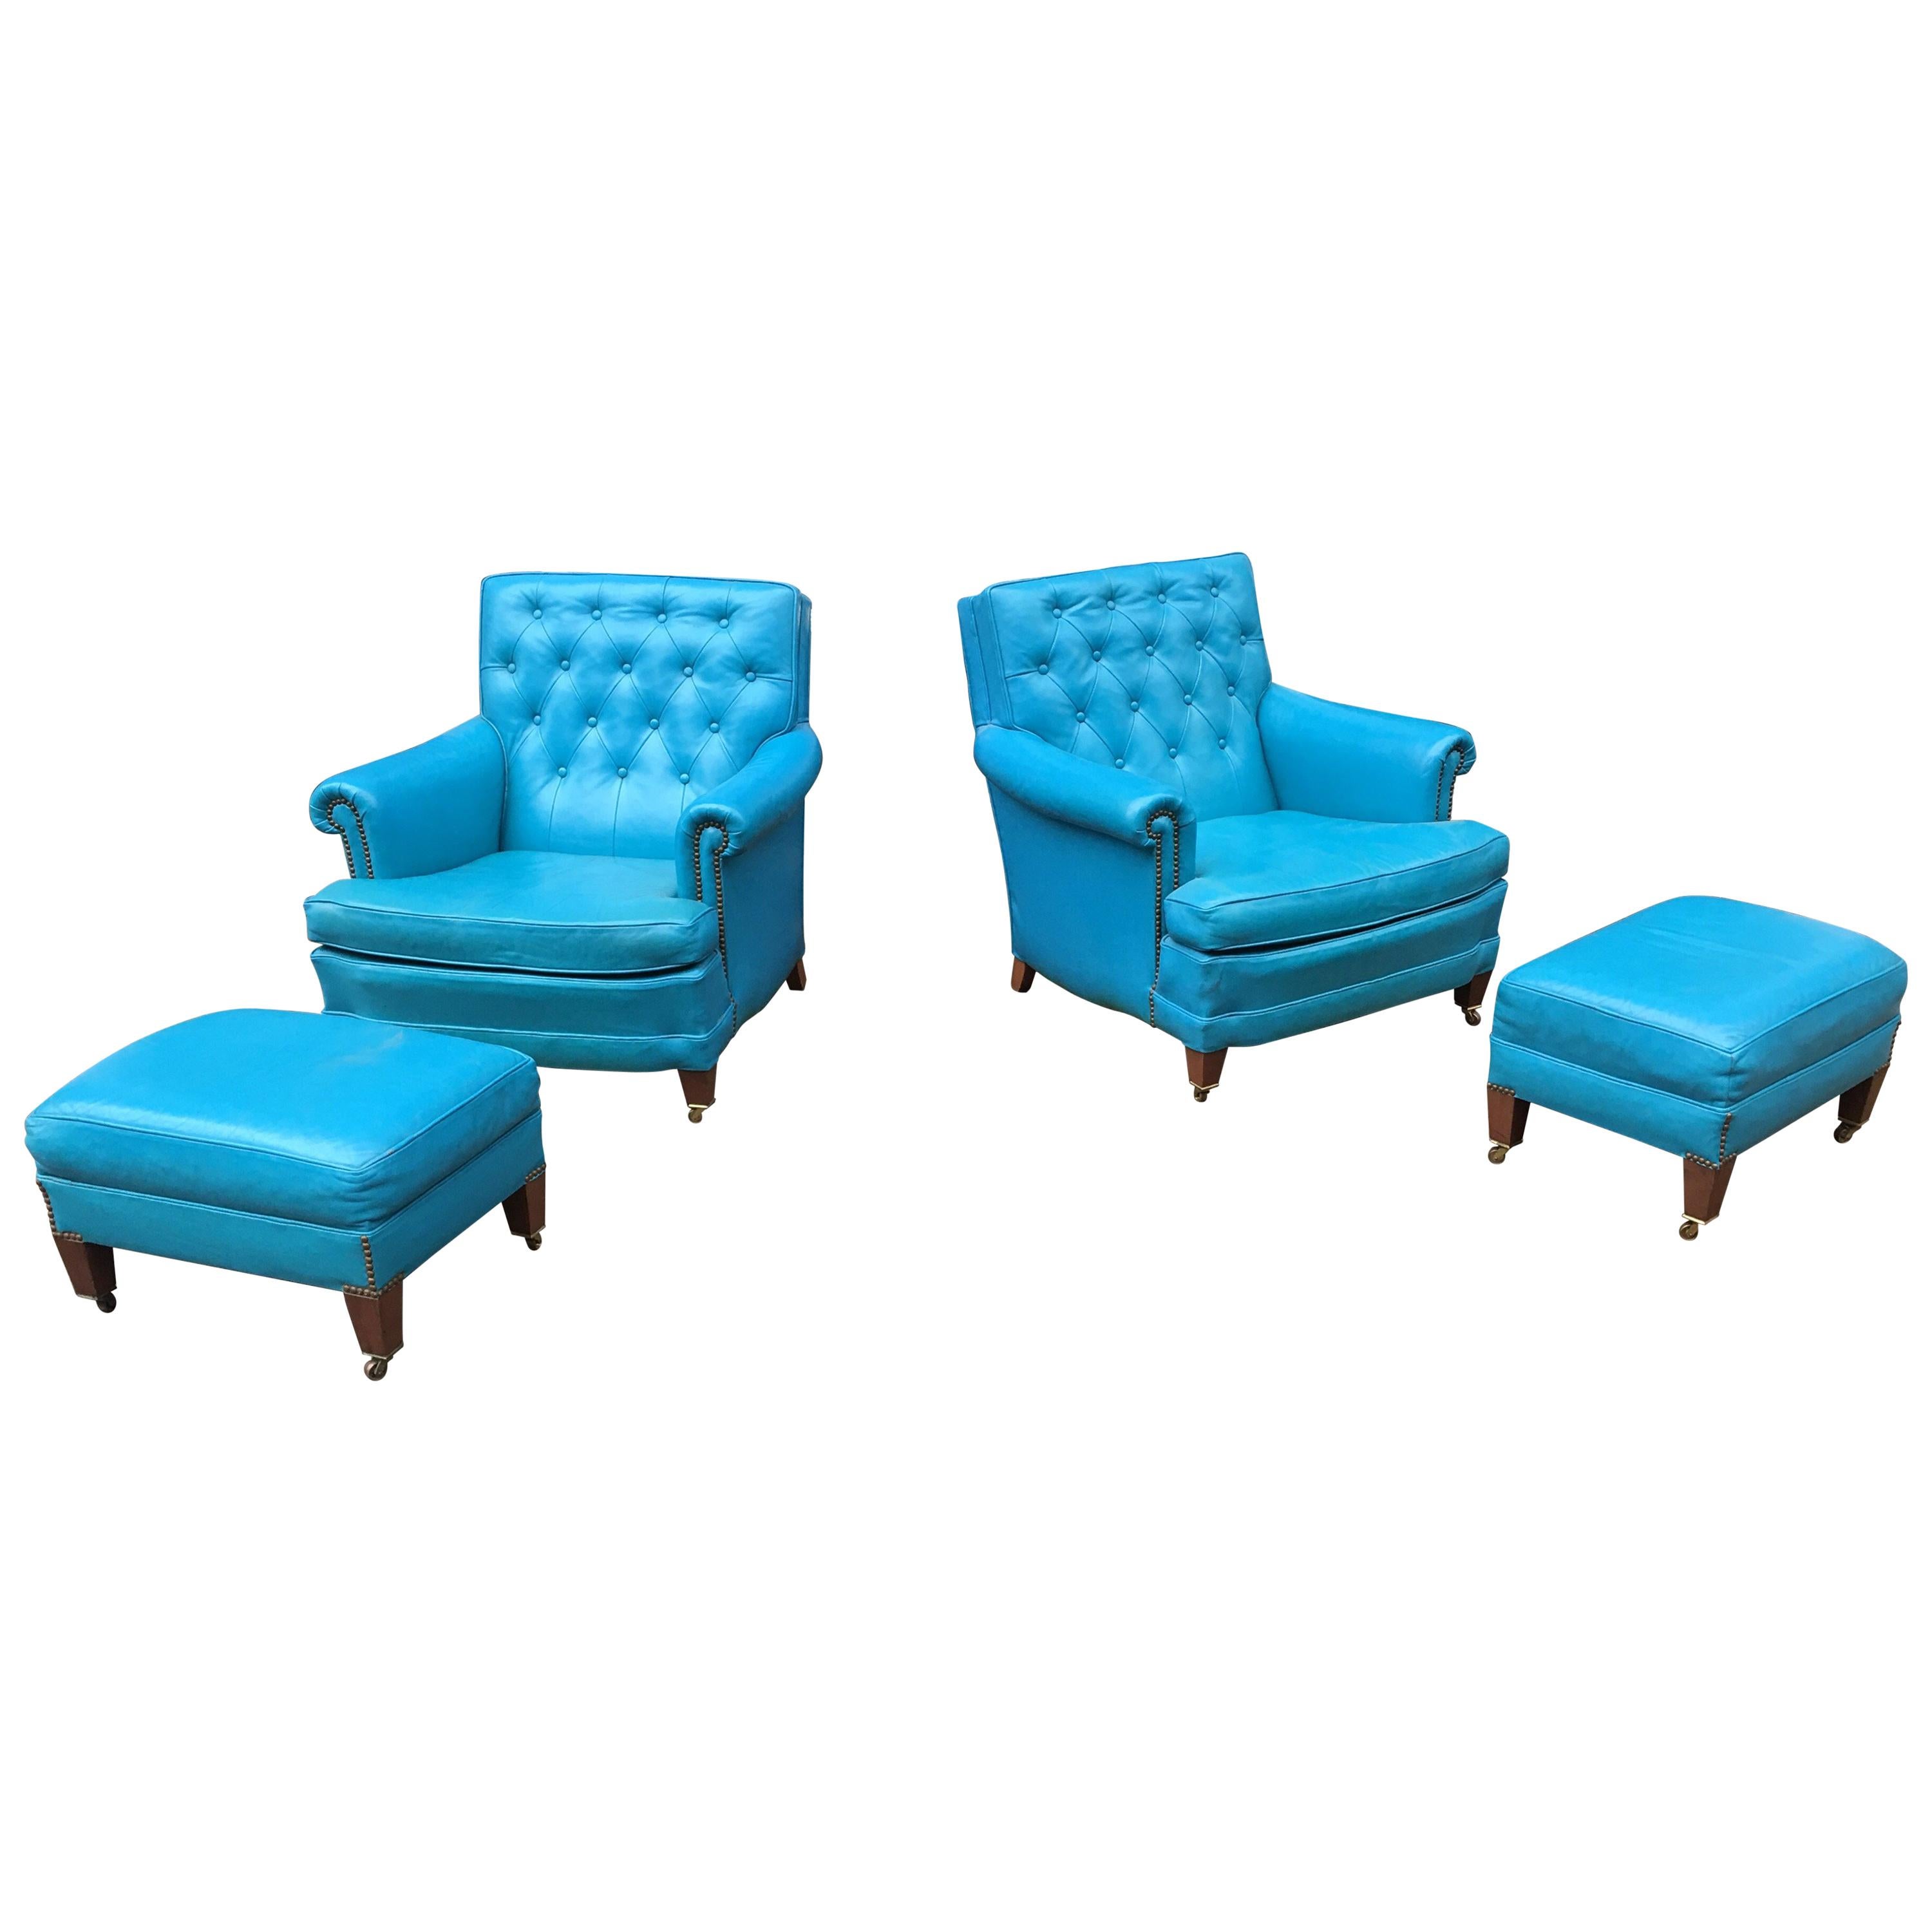 Pair of Aqua Blue Leather Chesterfield Club Chairs with Ottomans